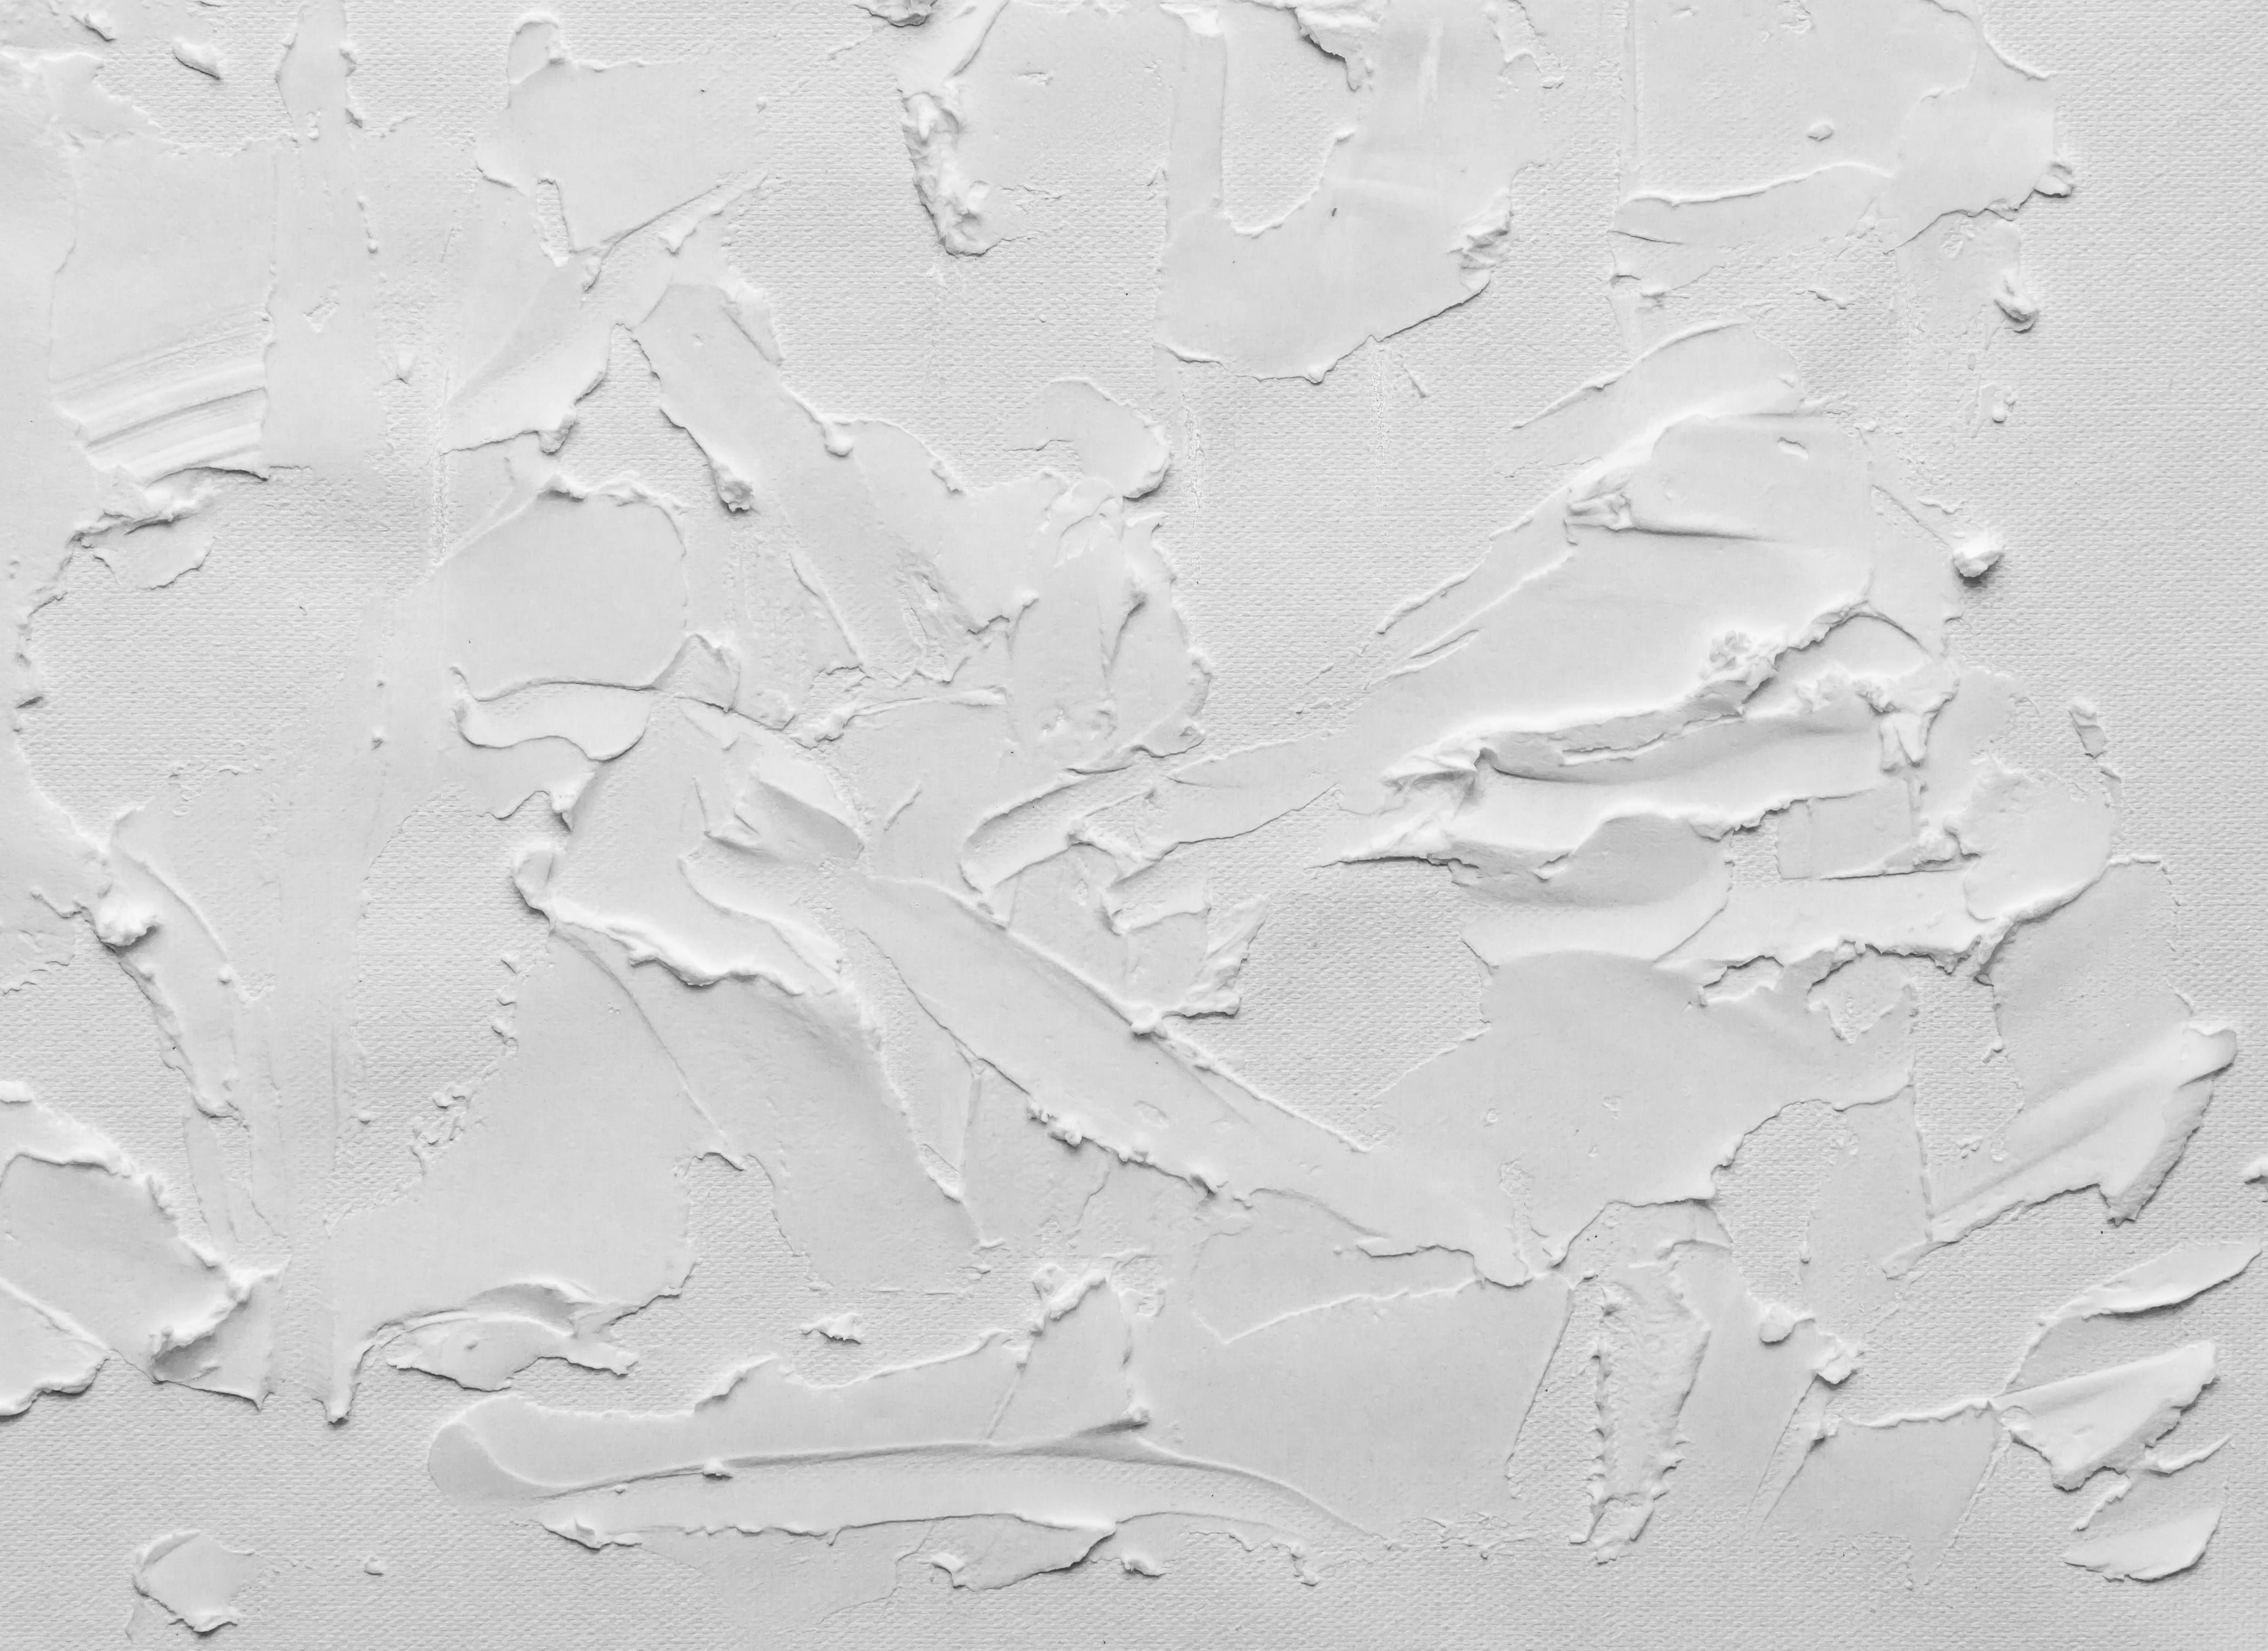 la pree. Art and craft videos, White background photo, Free textures